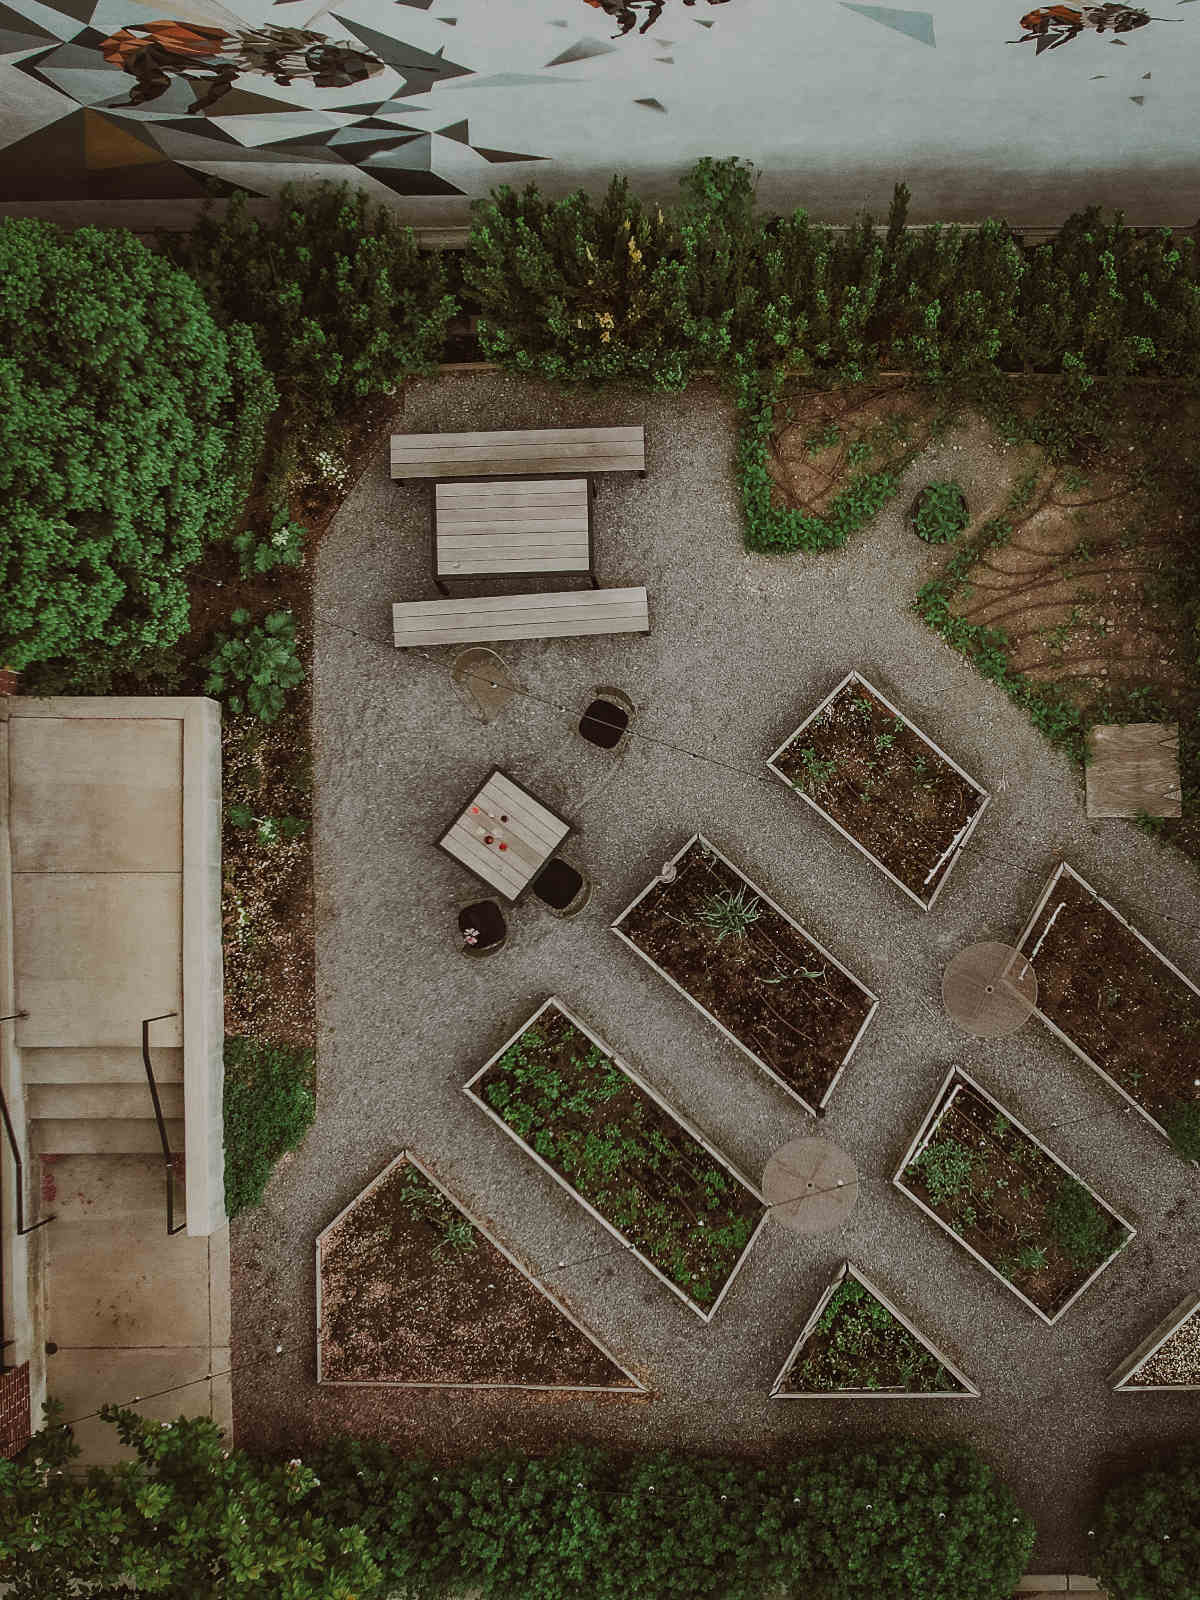 an aerial view of a garden with benches.